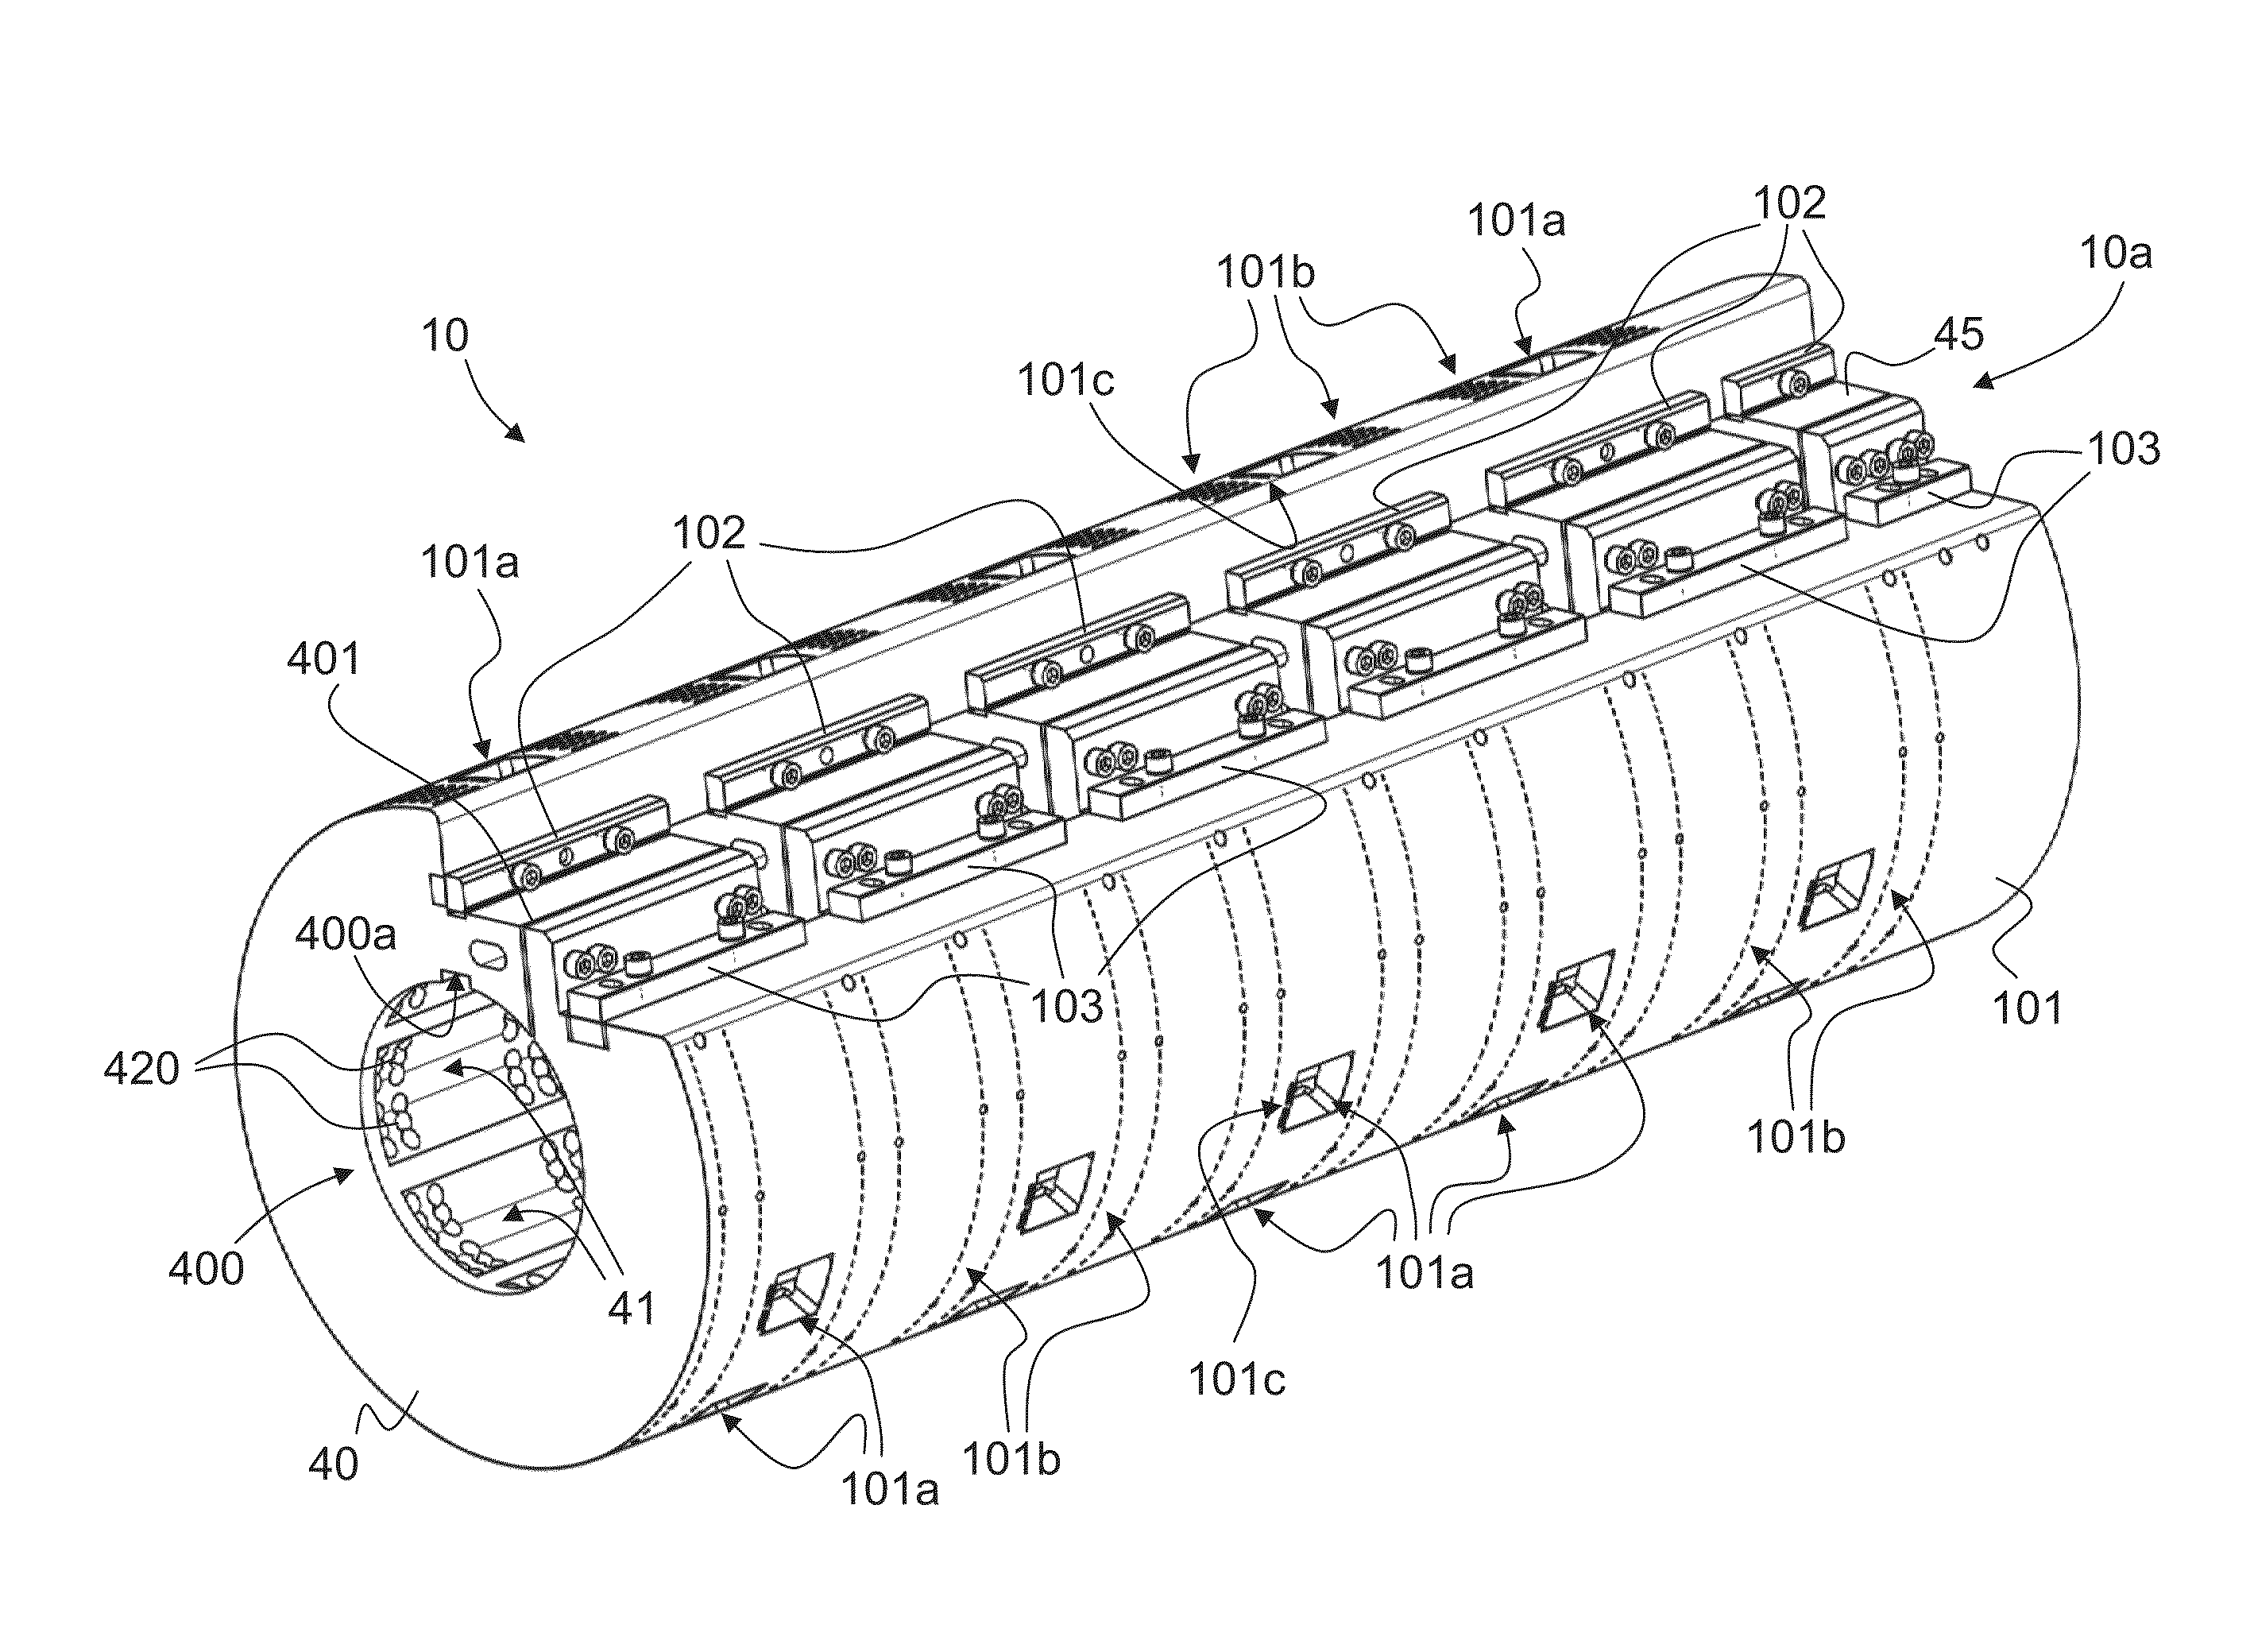 Cylinder body for orienting magnetic flakes contained in an ink or varnish vehicle applied on a sheet-like or web-like substrate